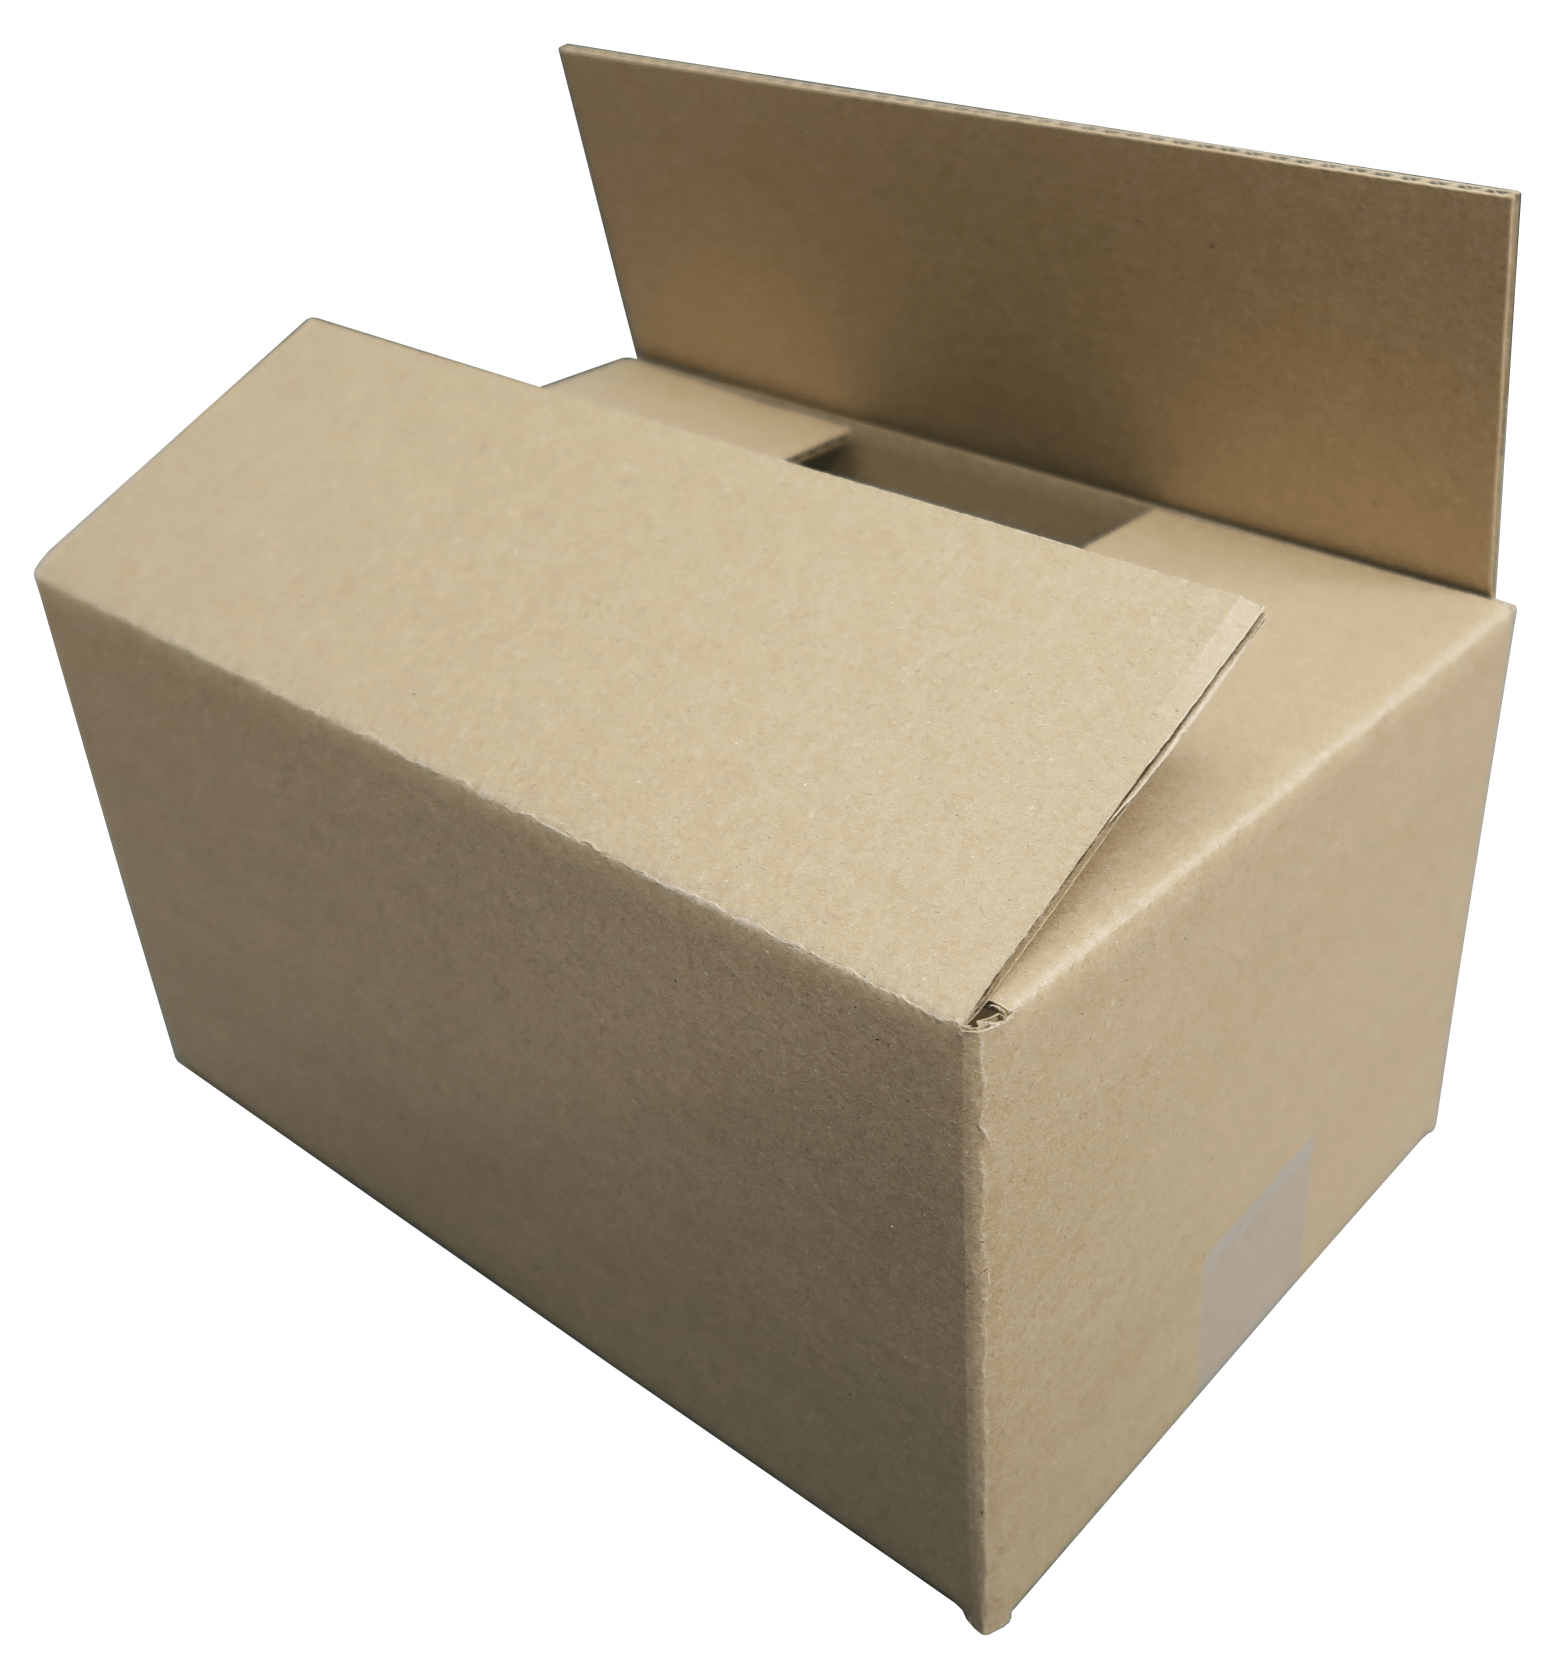 120t/bc/t Various Sizes/Amounts Double Wall Corrugated Cardboard Boxes 